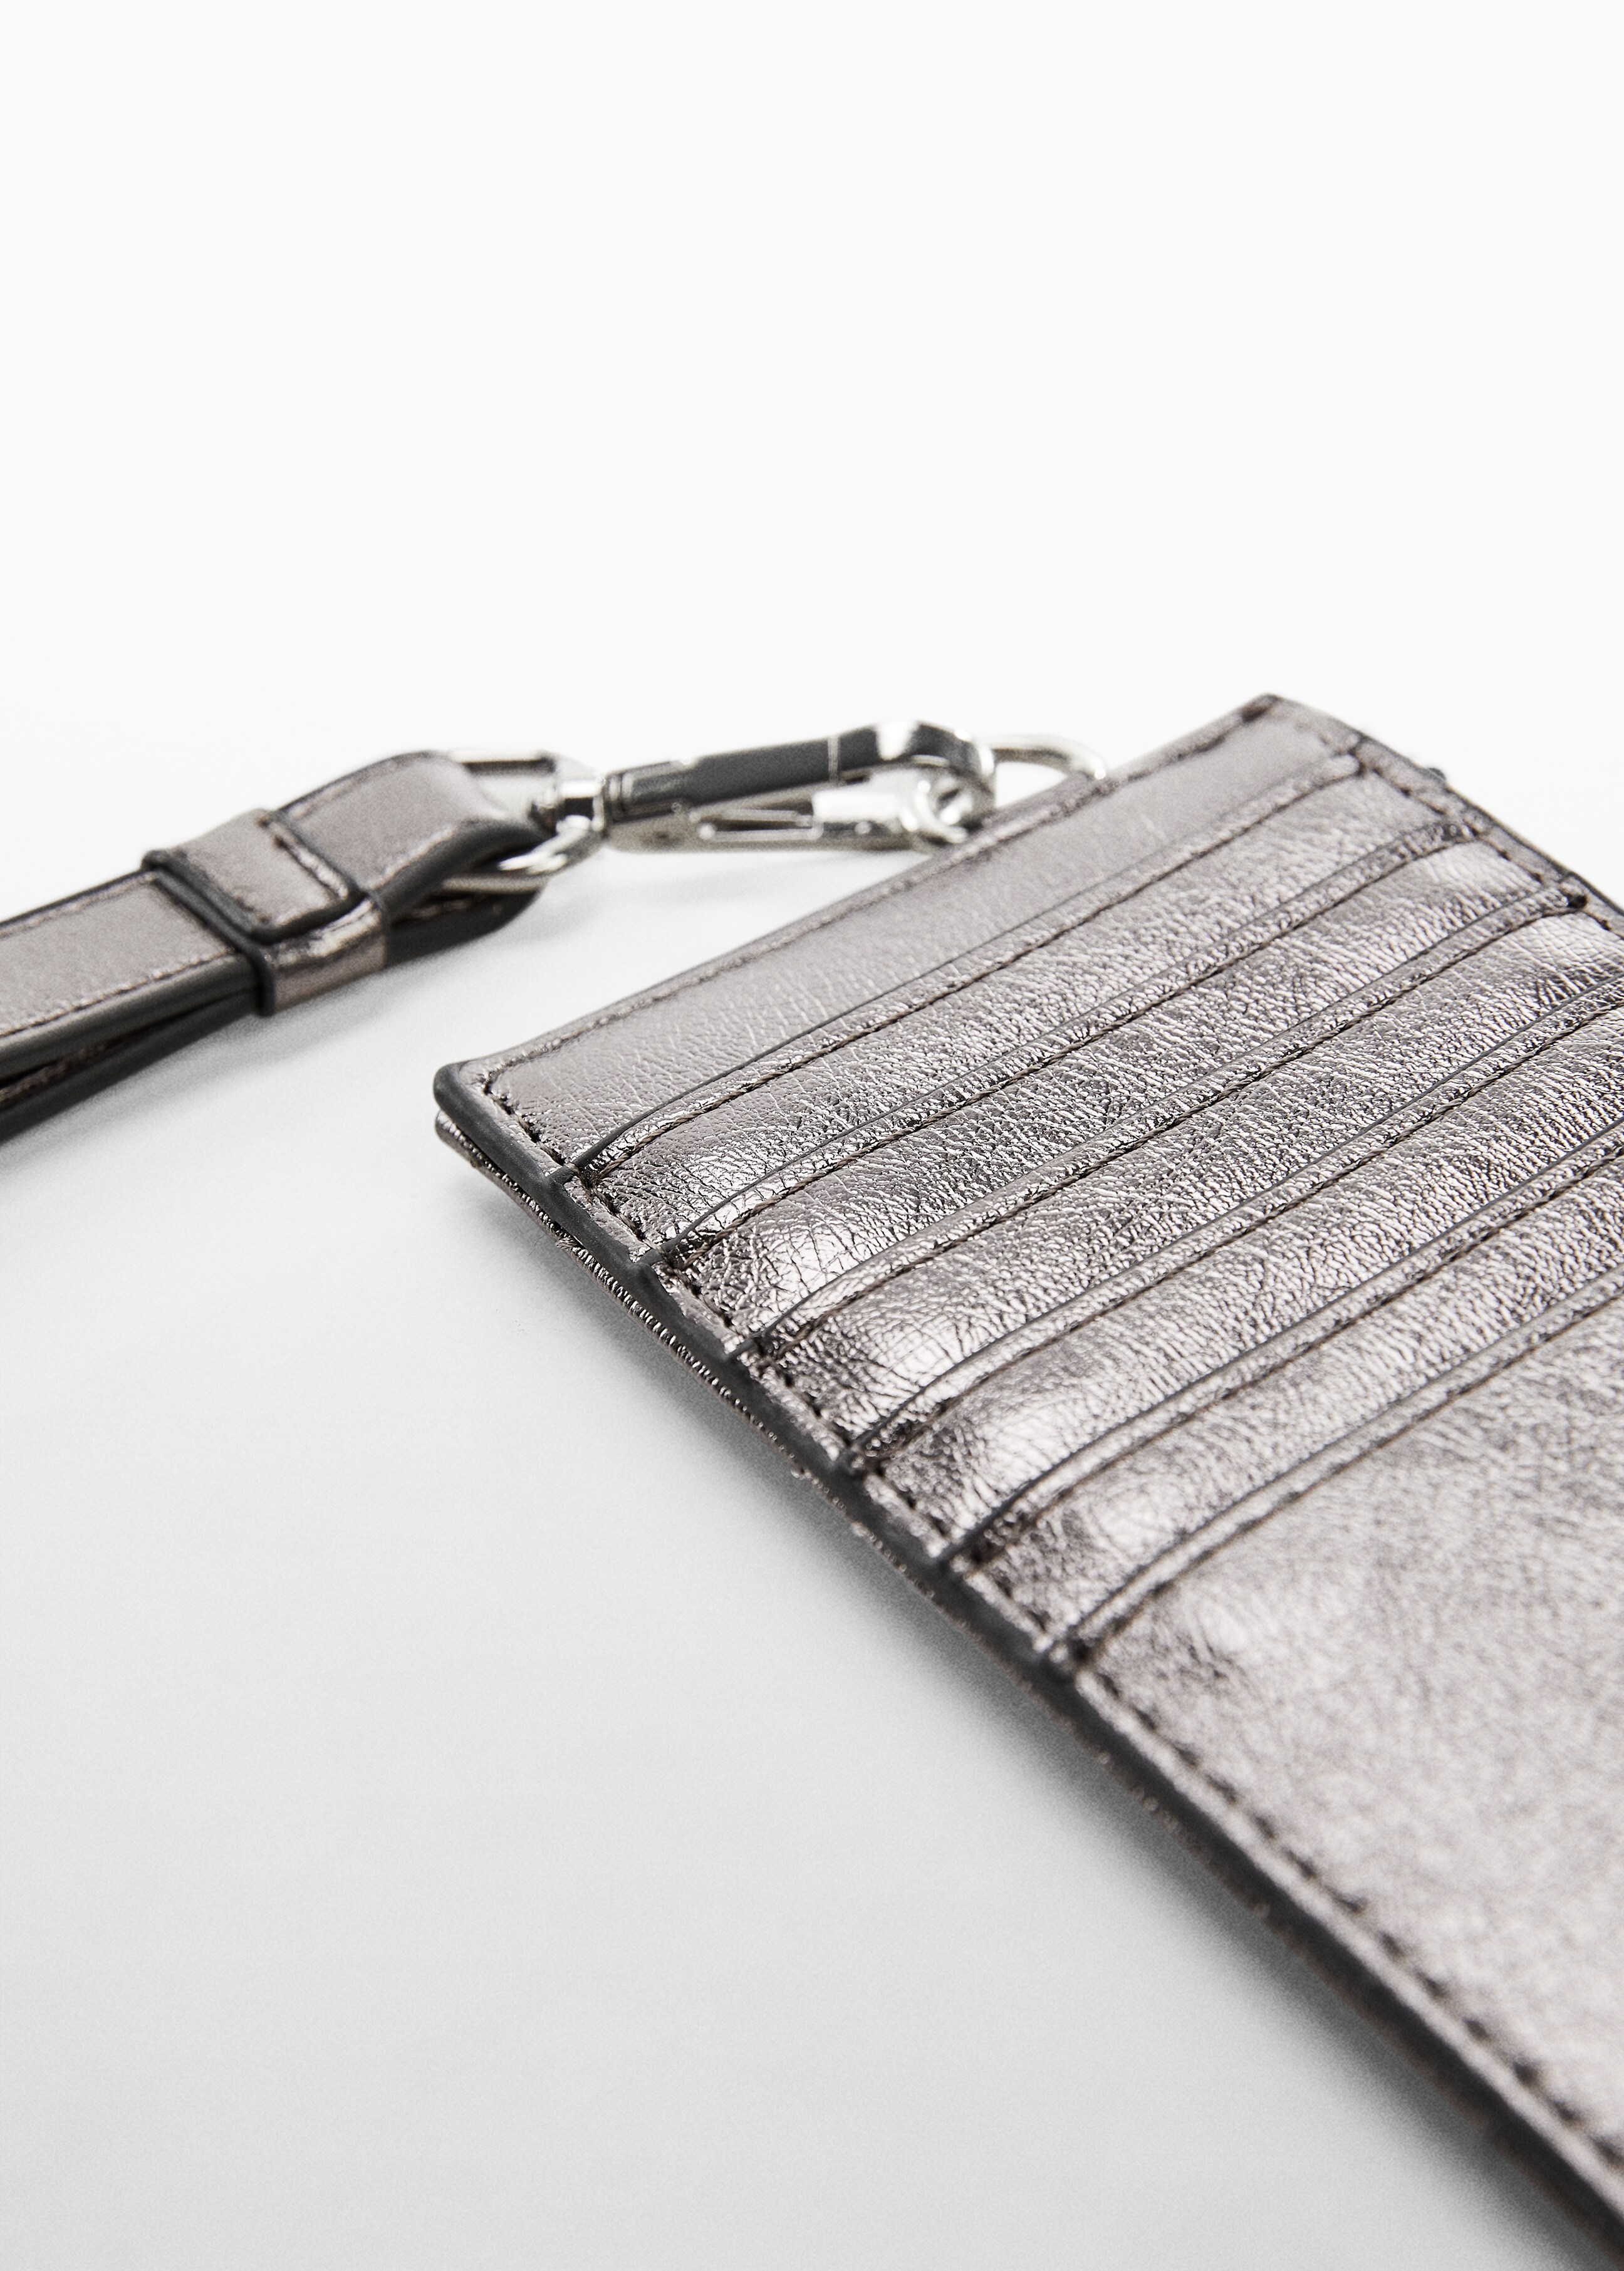 Padded metallic card holder - Details of the article 2